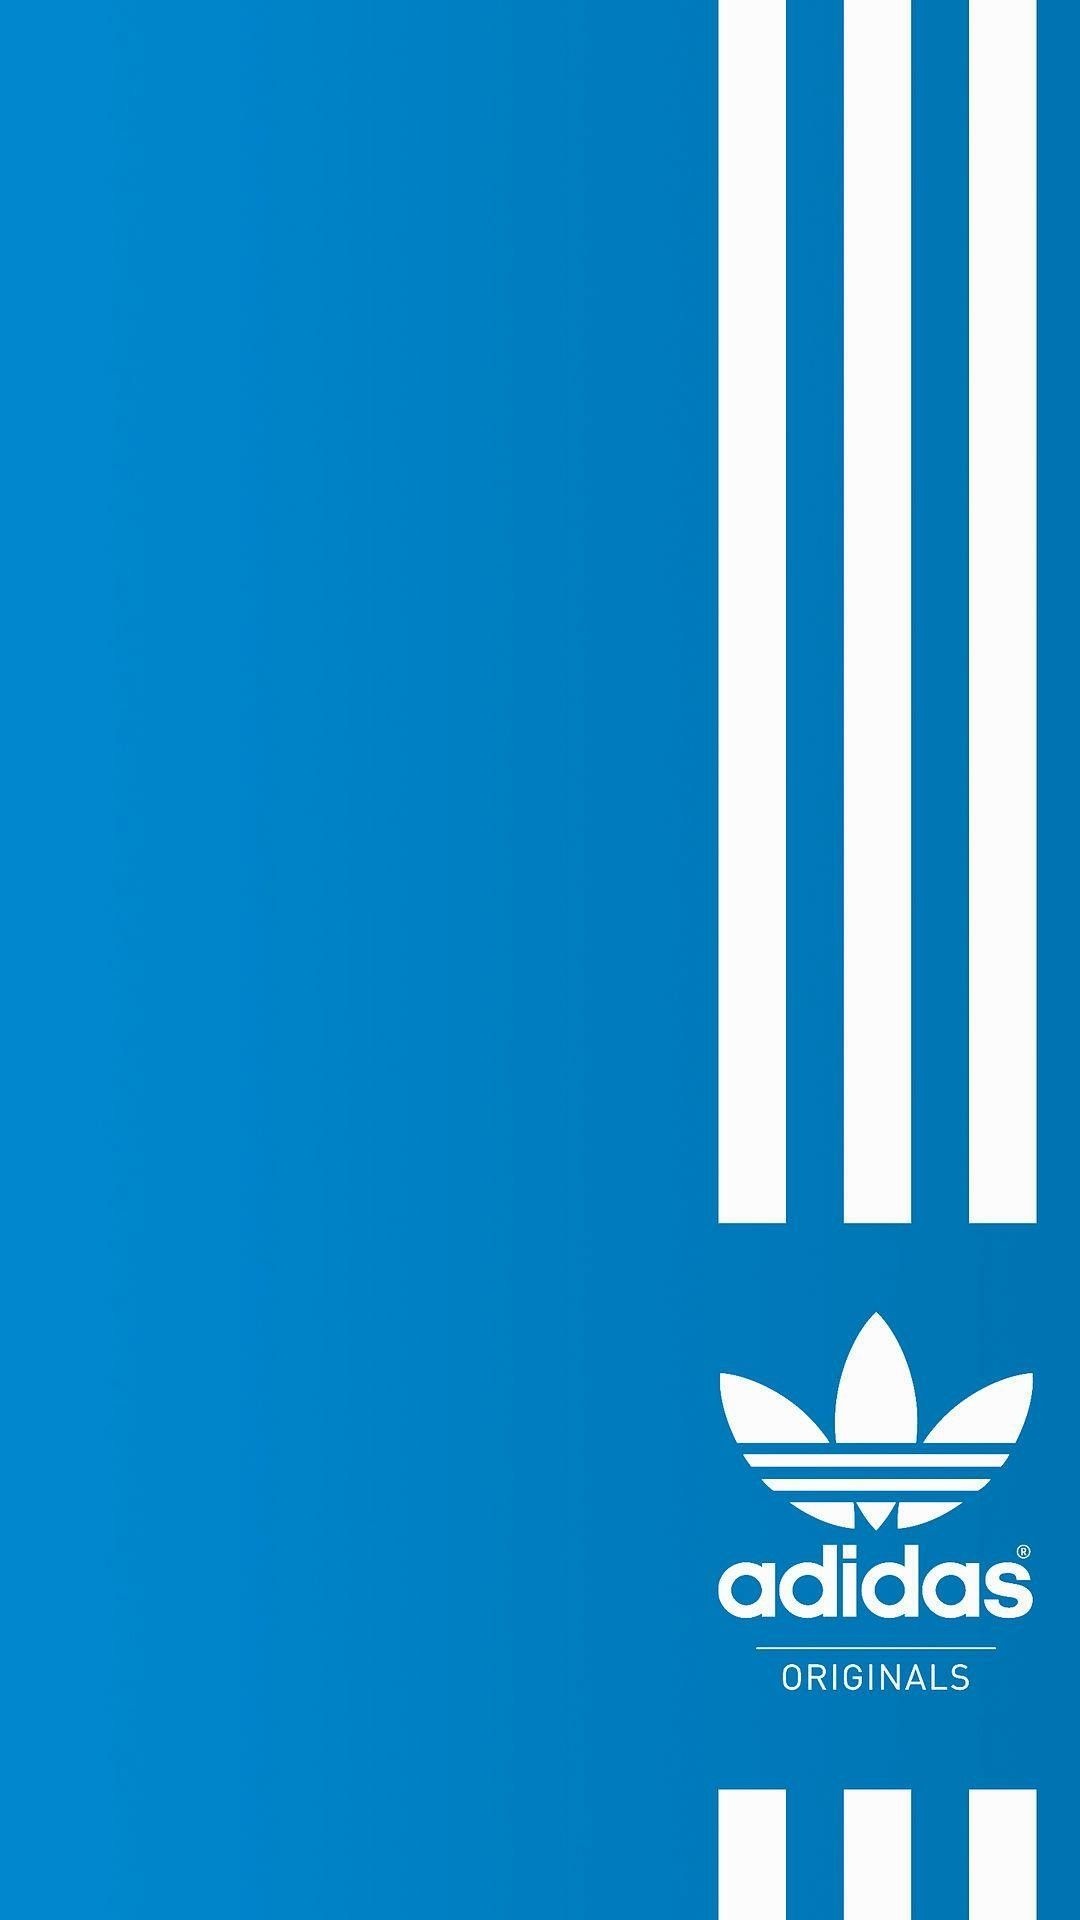 Adidas logo, iPhone wallpapers, Personal style, Fashion inspiration, 1080x1920 Full HD Handy